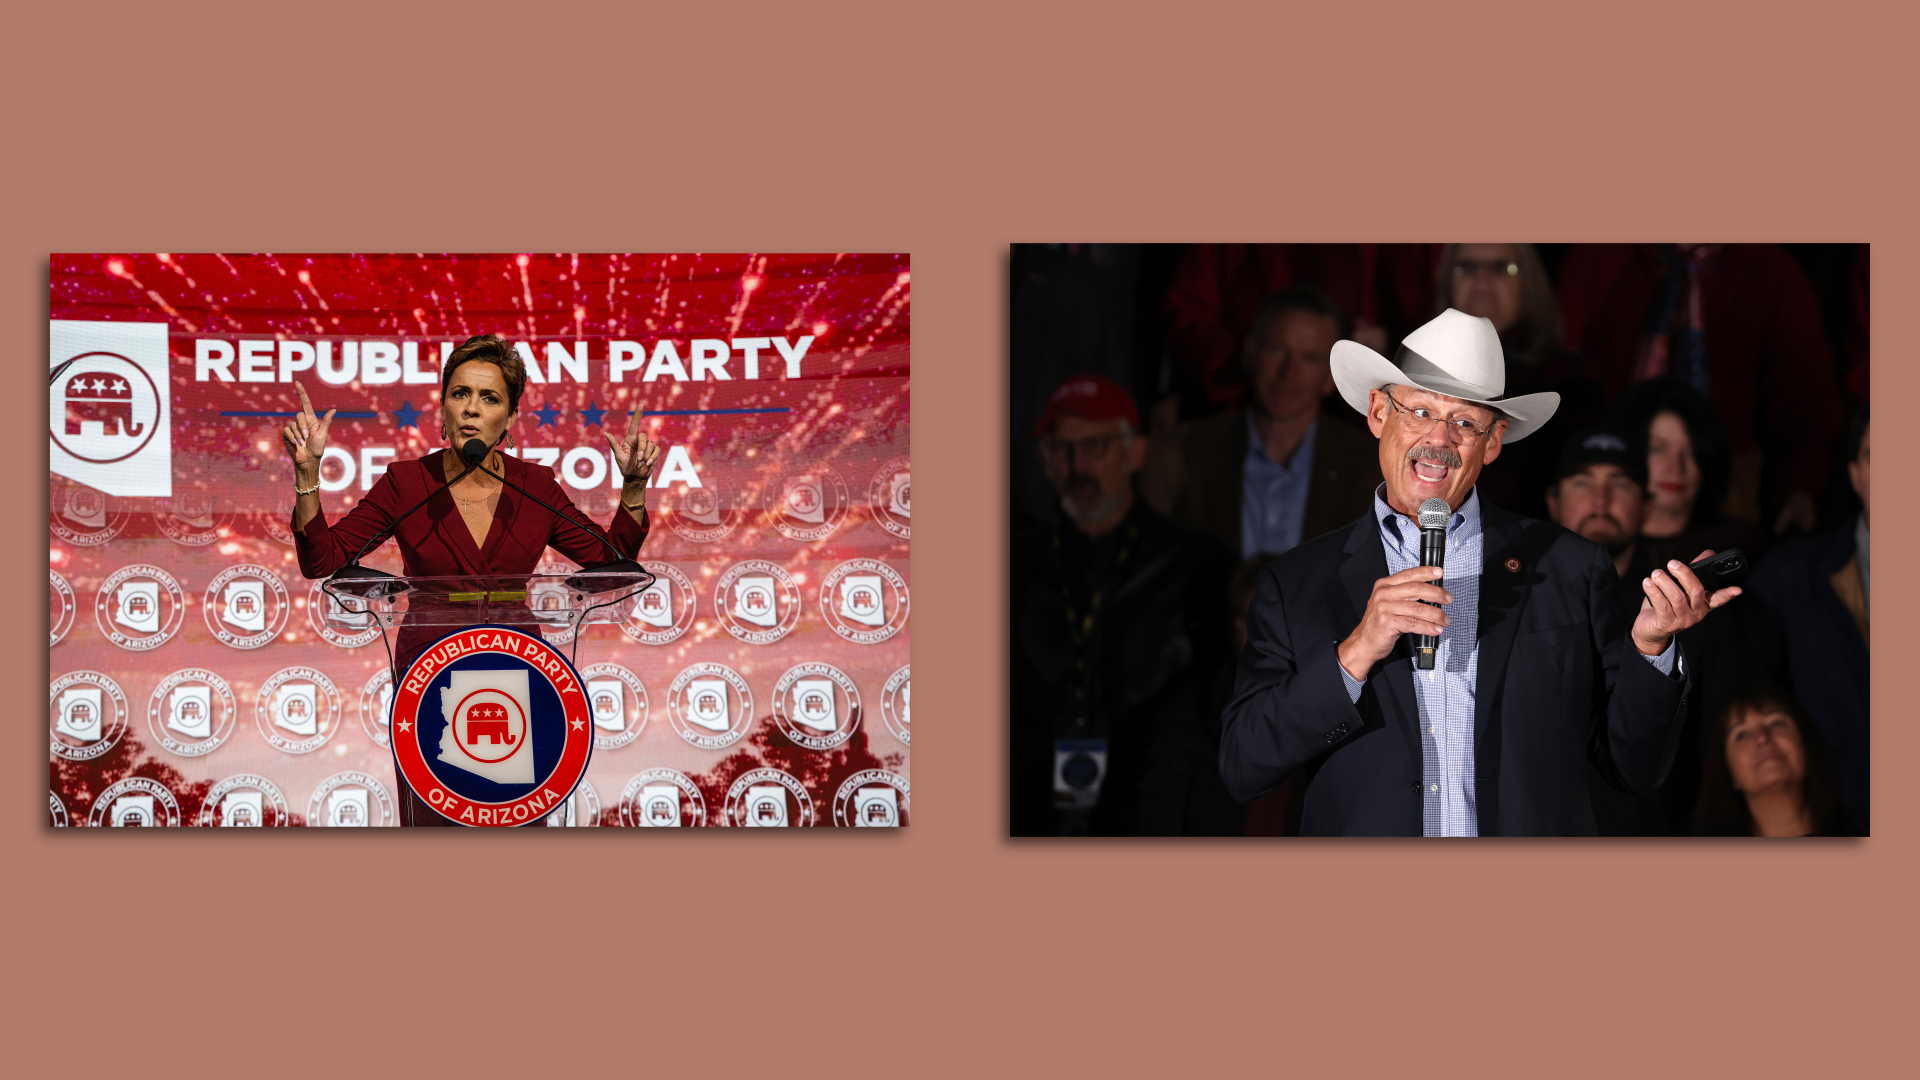 Side by side photos of two political candidates on stage.